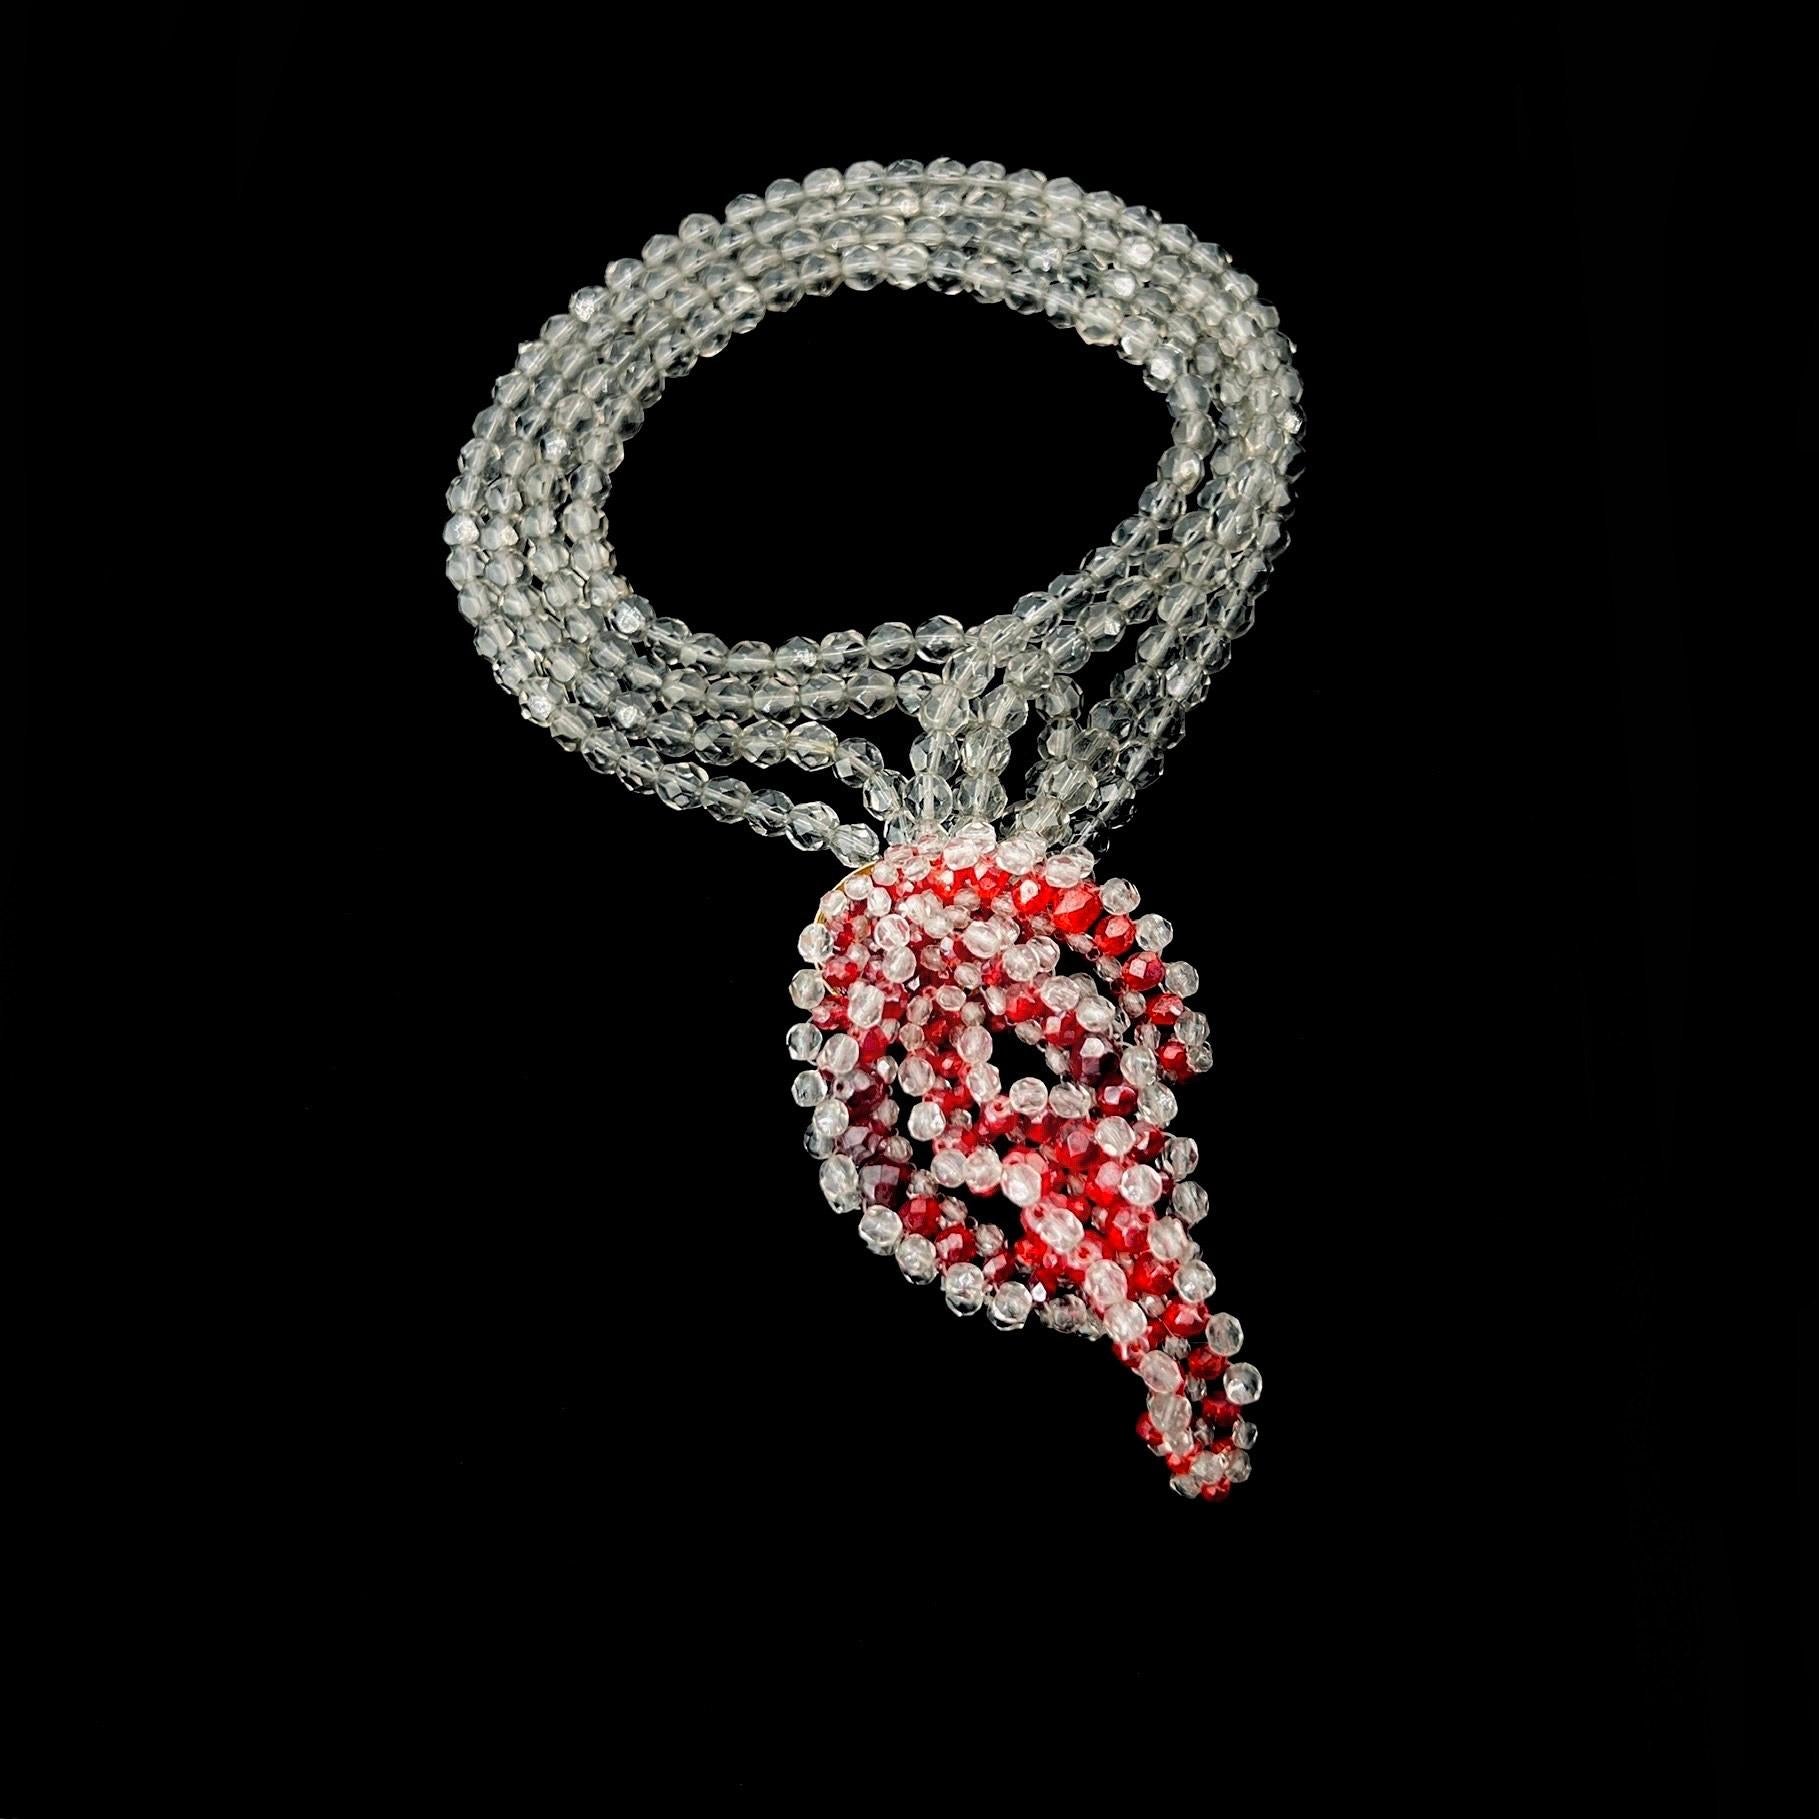 1950s Coppola e Toppo Sculpted Crystal Collar Necklace Smokey Red Surrealism In Good Condition For Sale In Hyattsville, MD